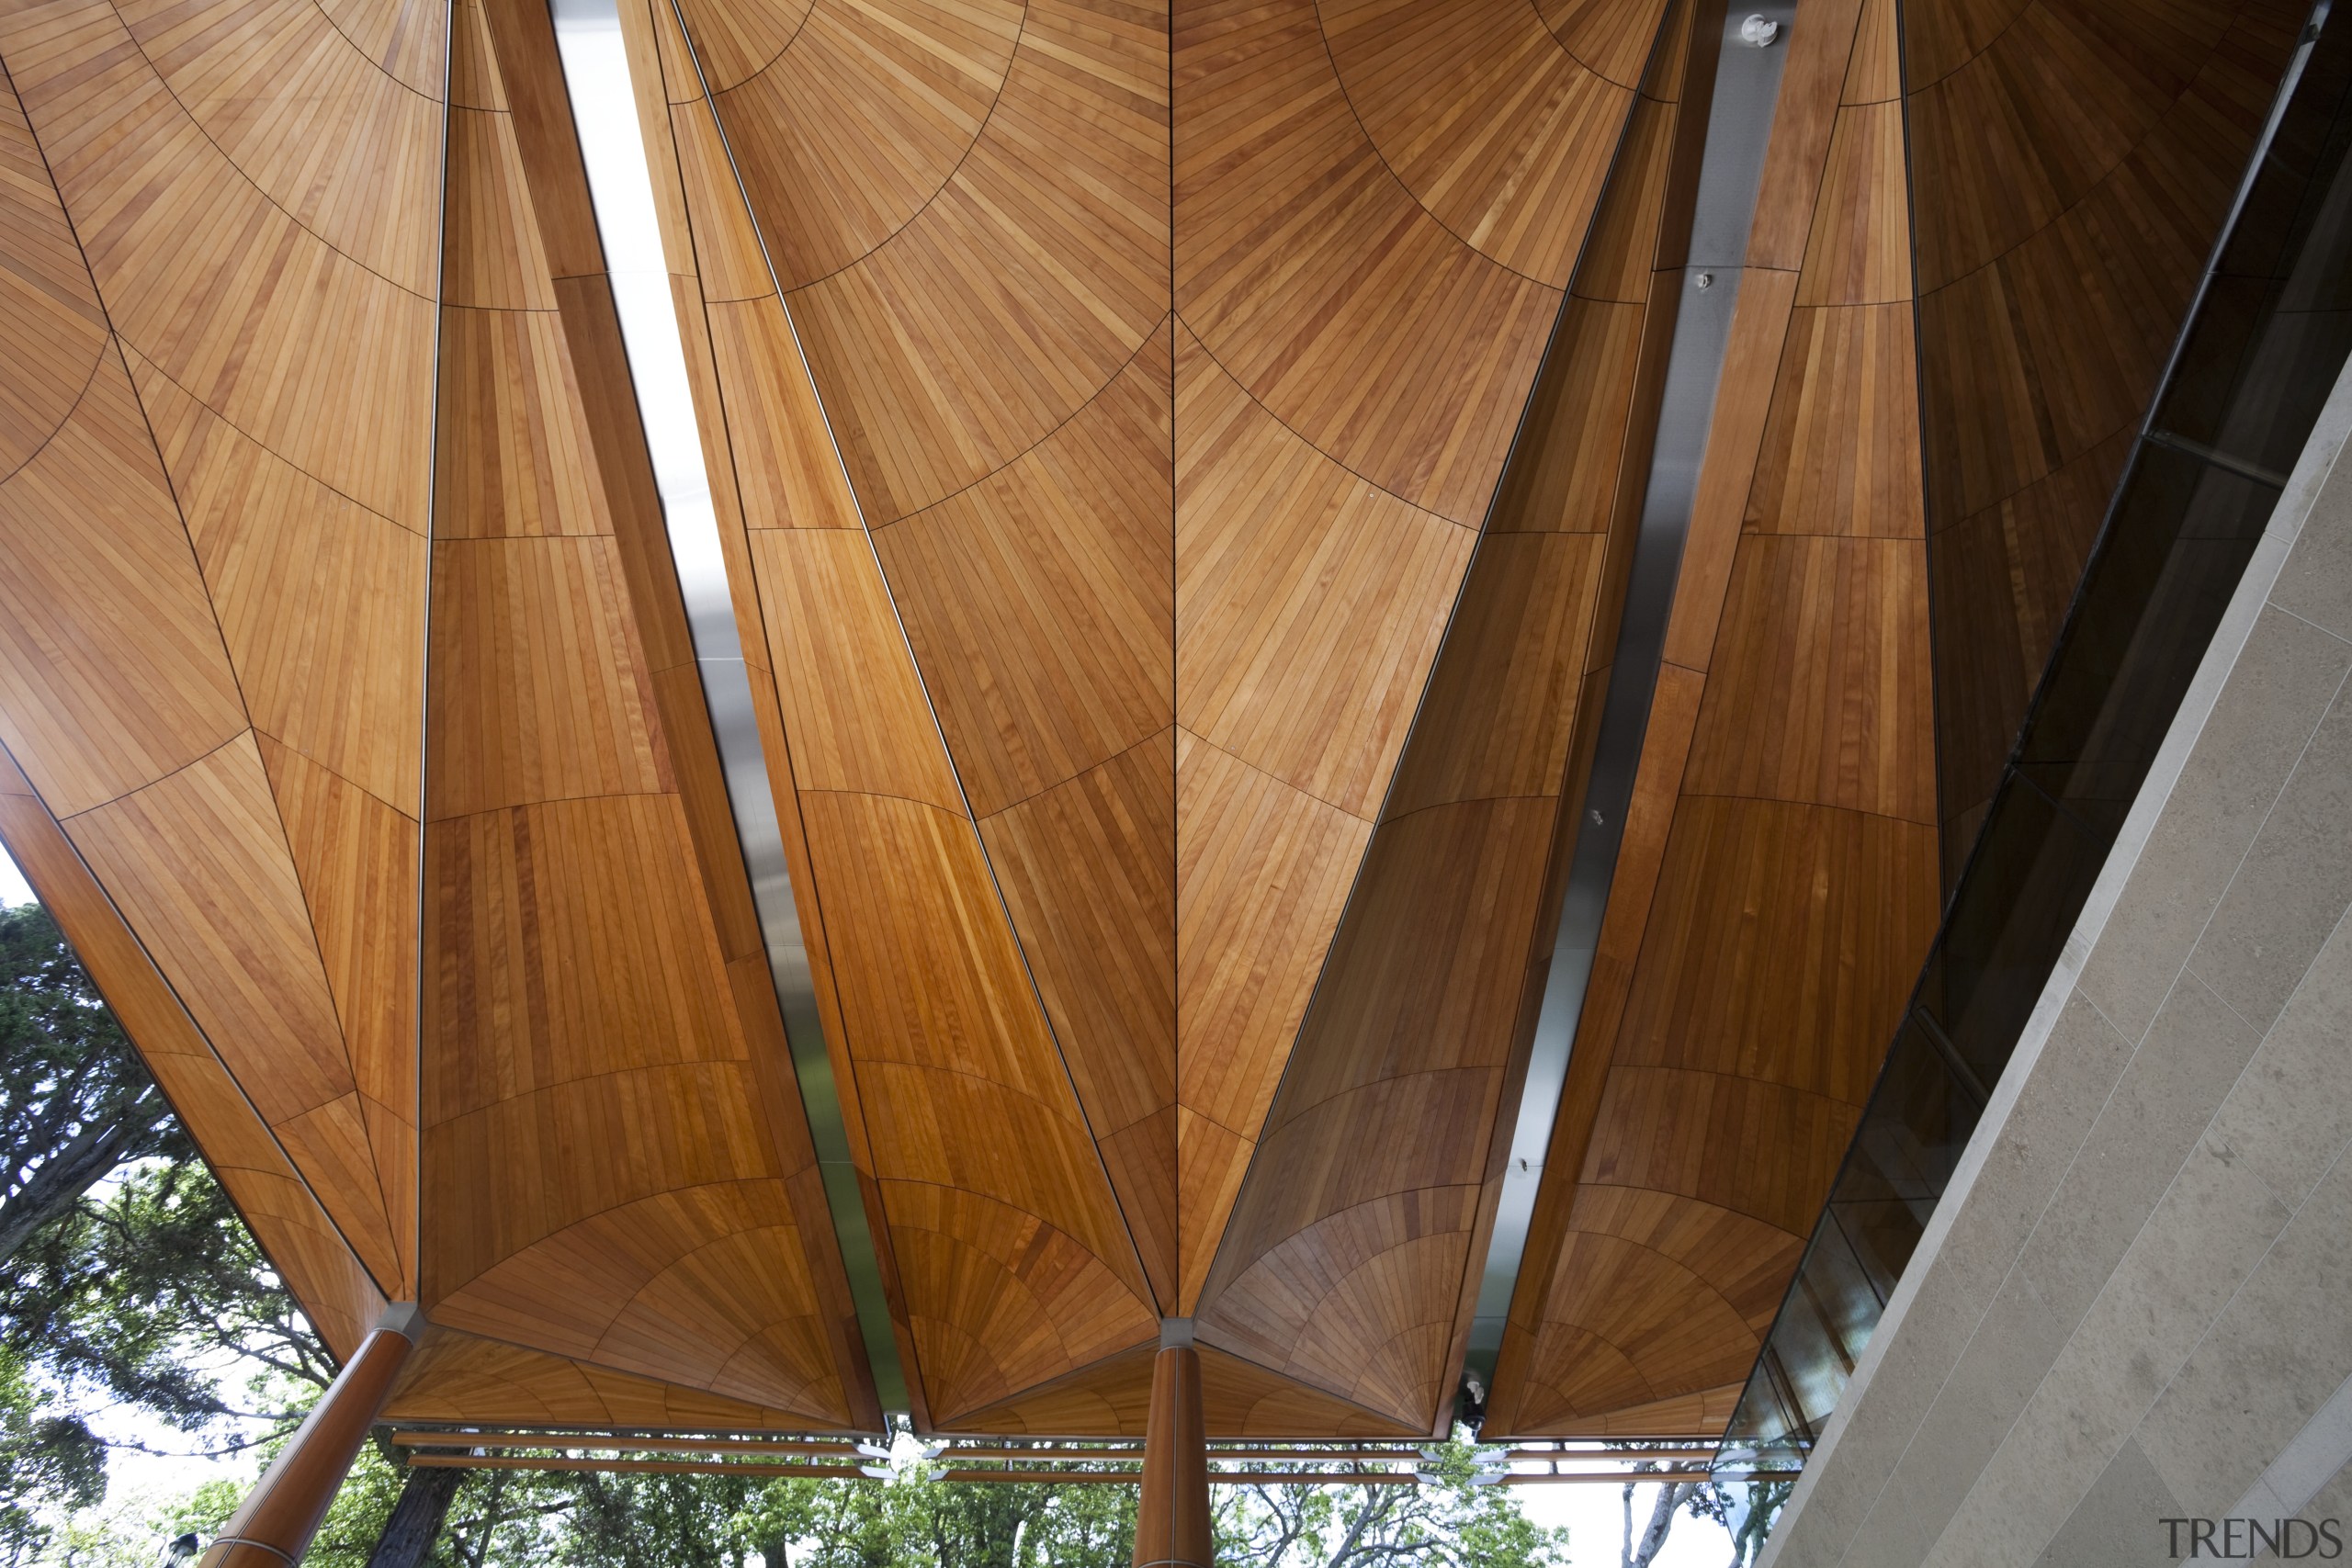 View of exterior facade of Auckland Art Gallery. architecture, beam, ceiling, daylighting, line, roof, structure, wood, brown, orange